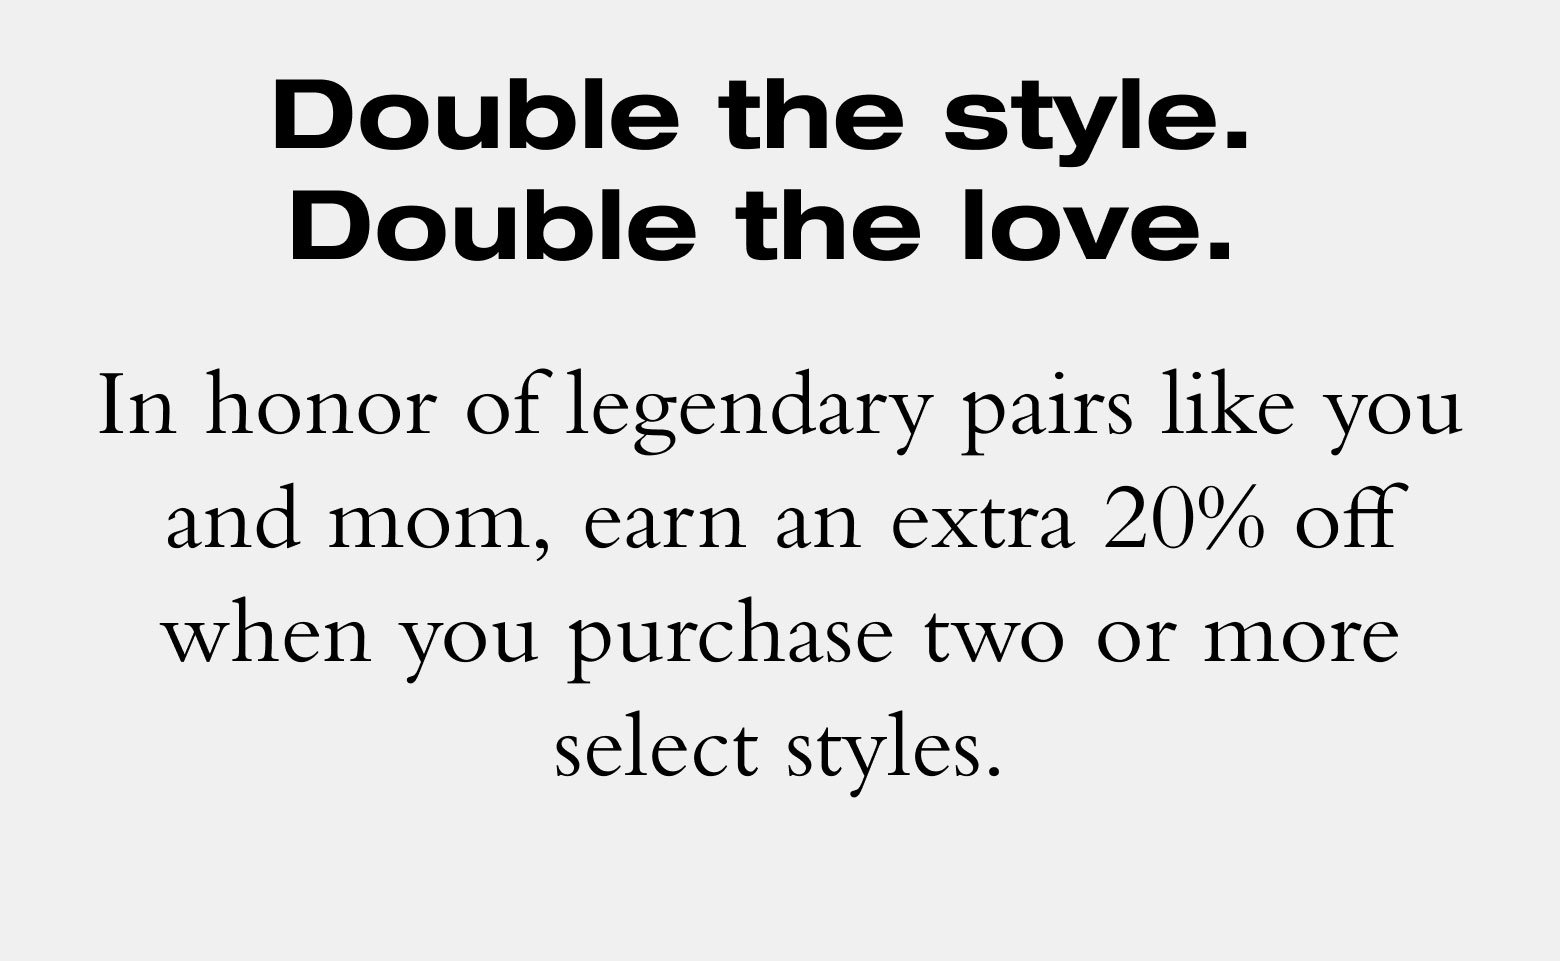 Double the style. Double the love. In honor of legendary pairs like you and mom, earn an extra 20% off when you purchase two or more select styles.